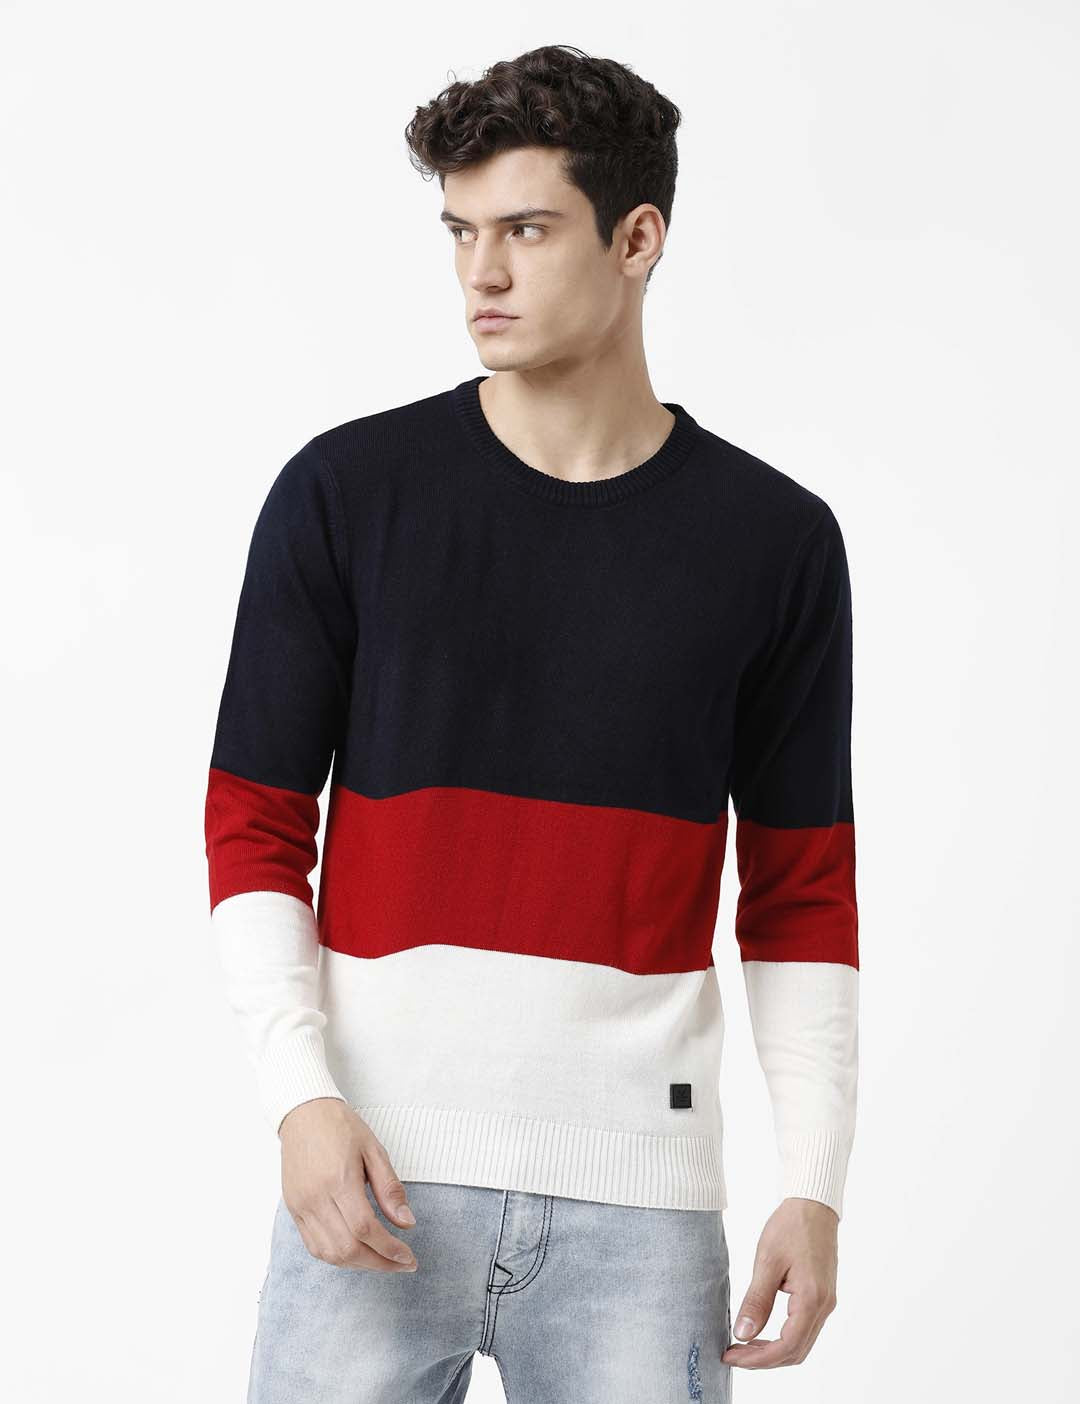 Colourblocked Knitted Comfy Sweater